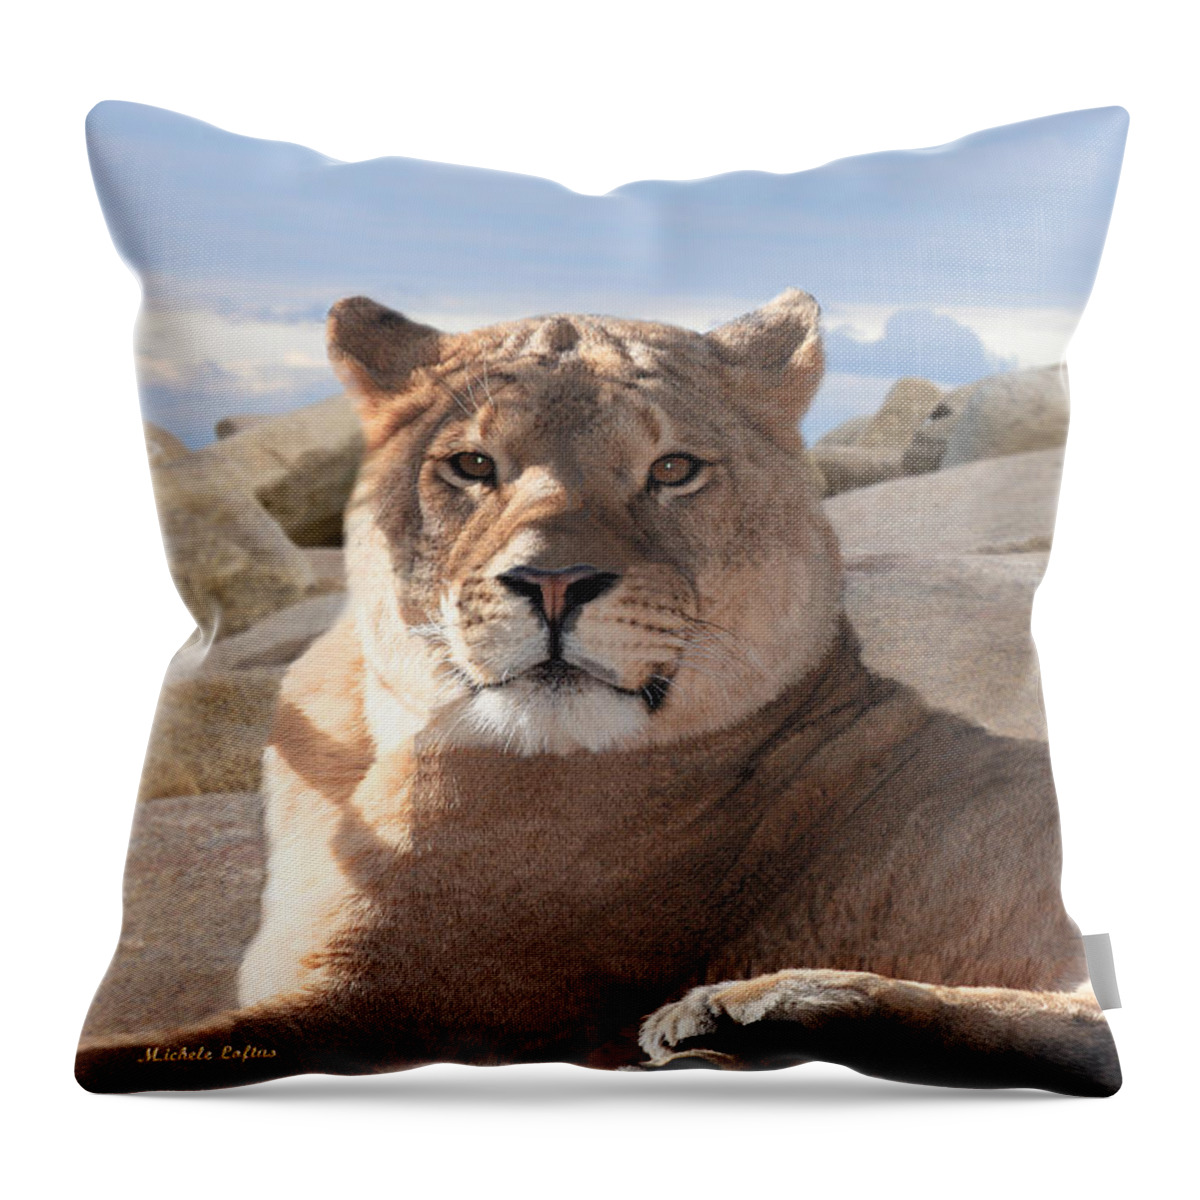 Female Throw Pillow featuring the photograph Lion by Michele A Loftus